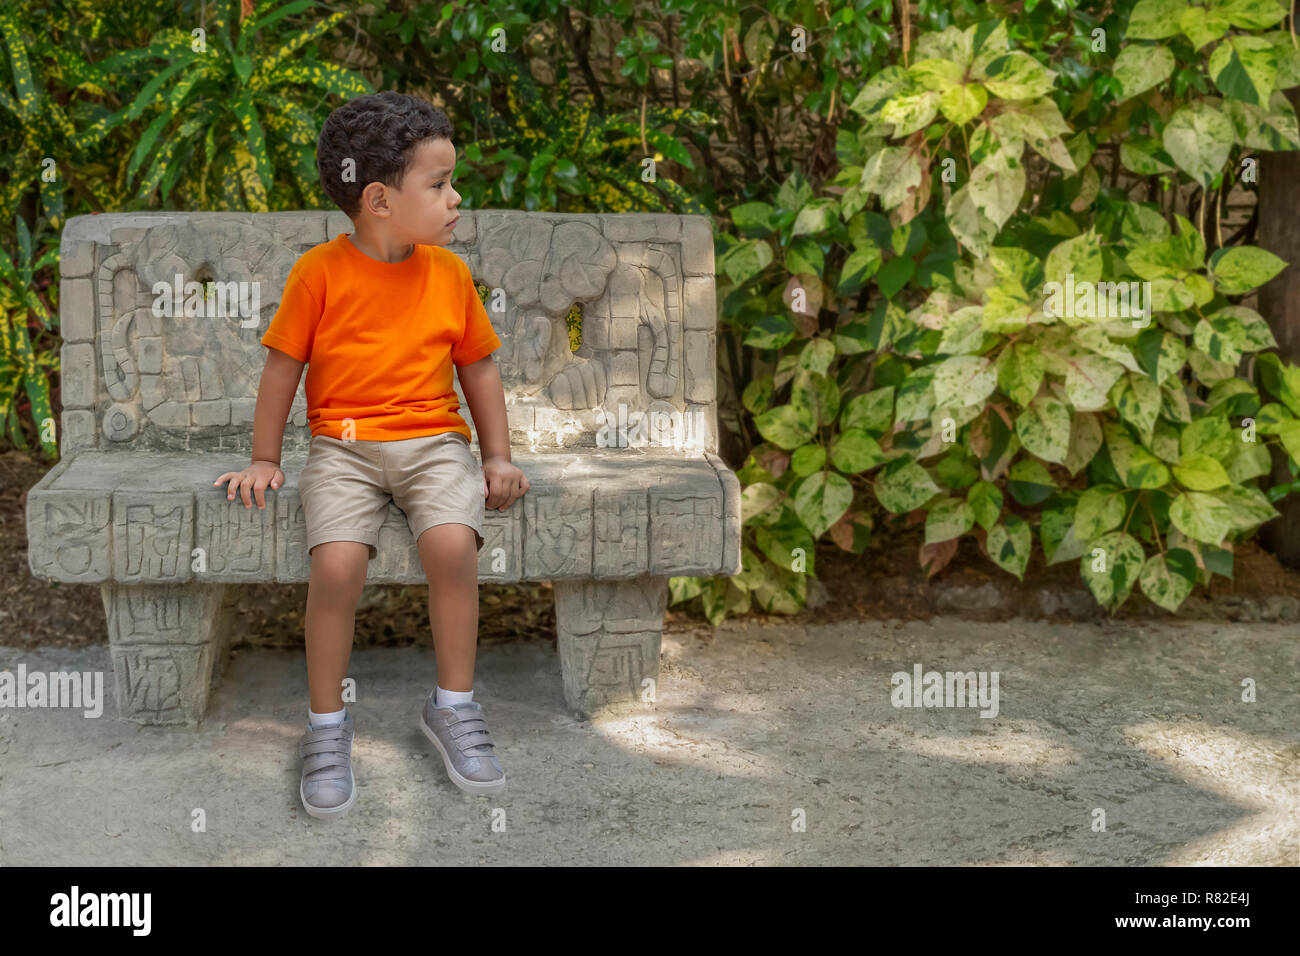 A concerned little boy sits on a cement park bench looking away. He is dressed in, orange t-shirt, tan shorts, and gray shoes sit waiting for mommy Stock Photo